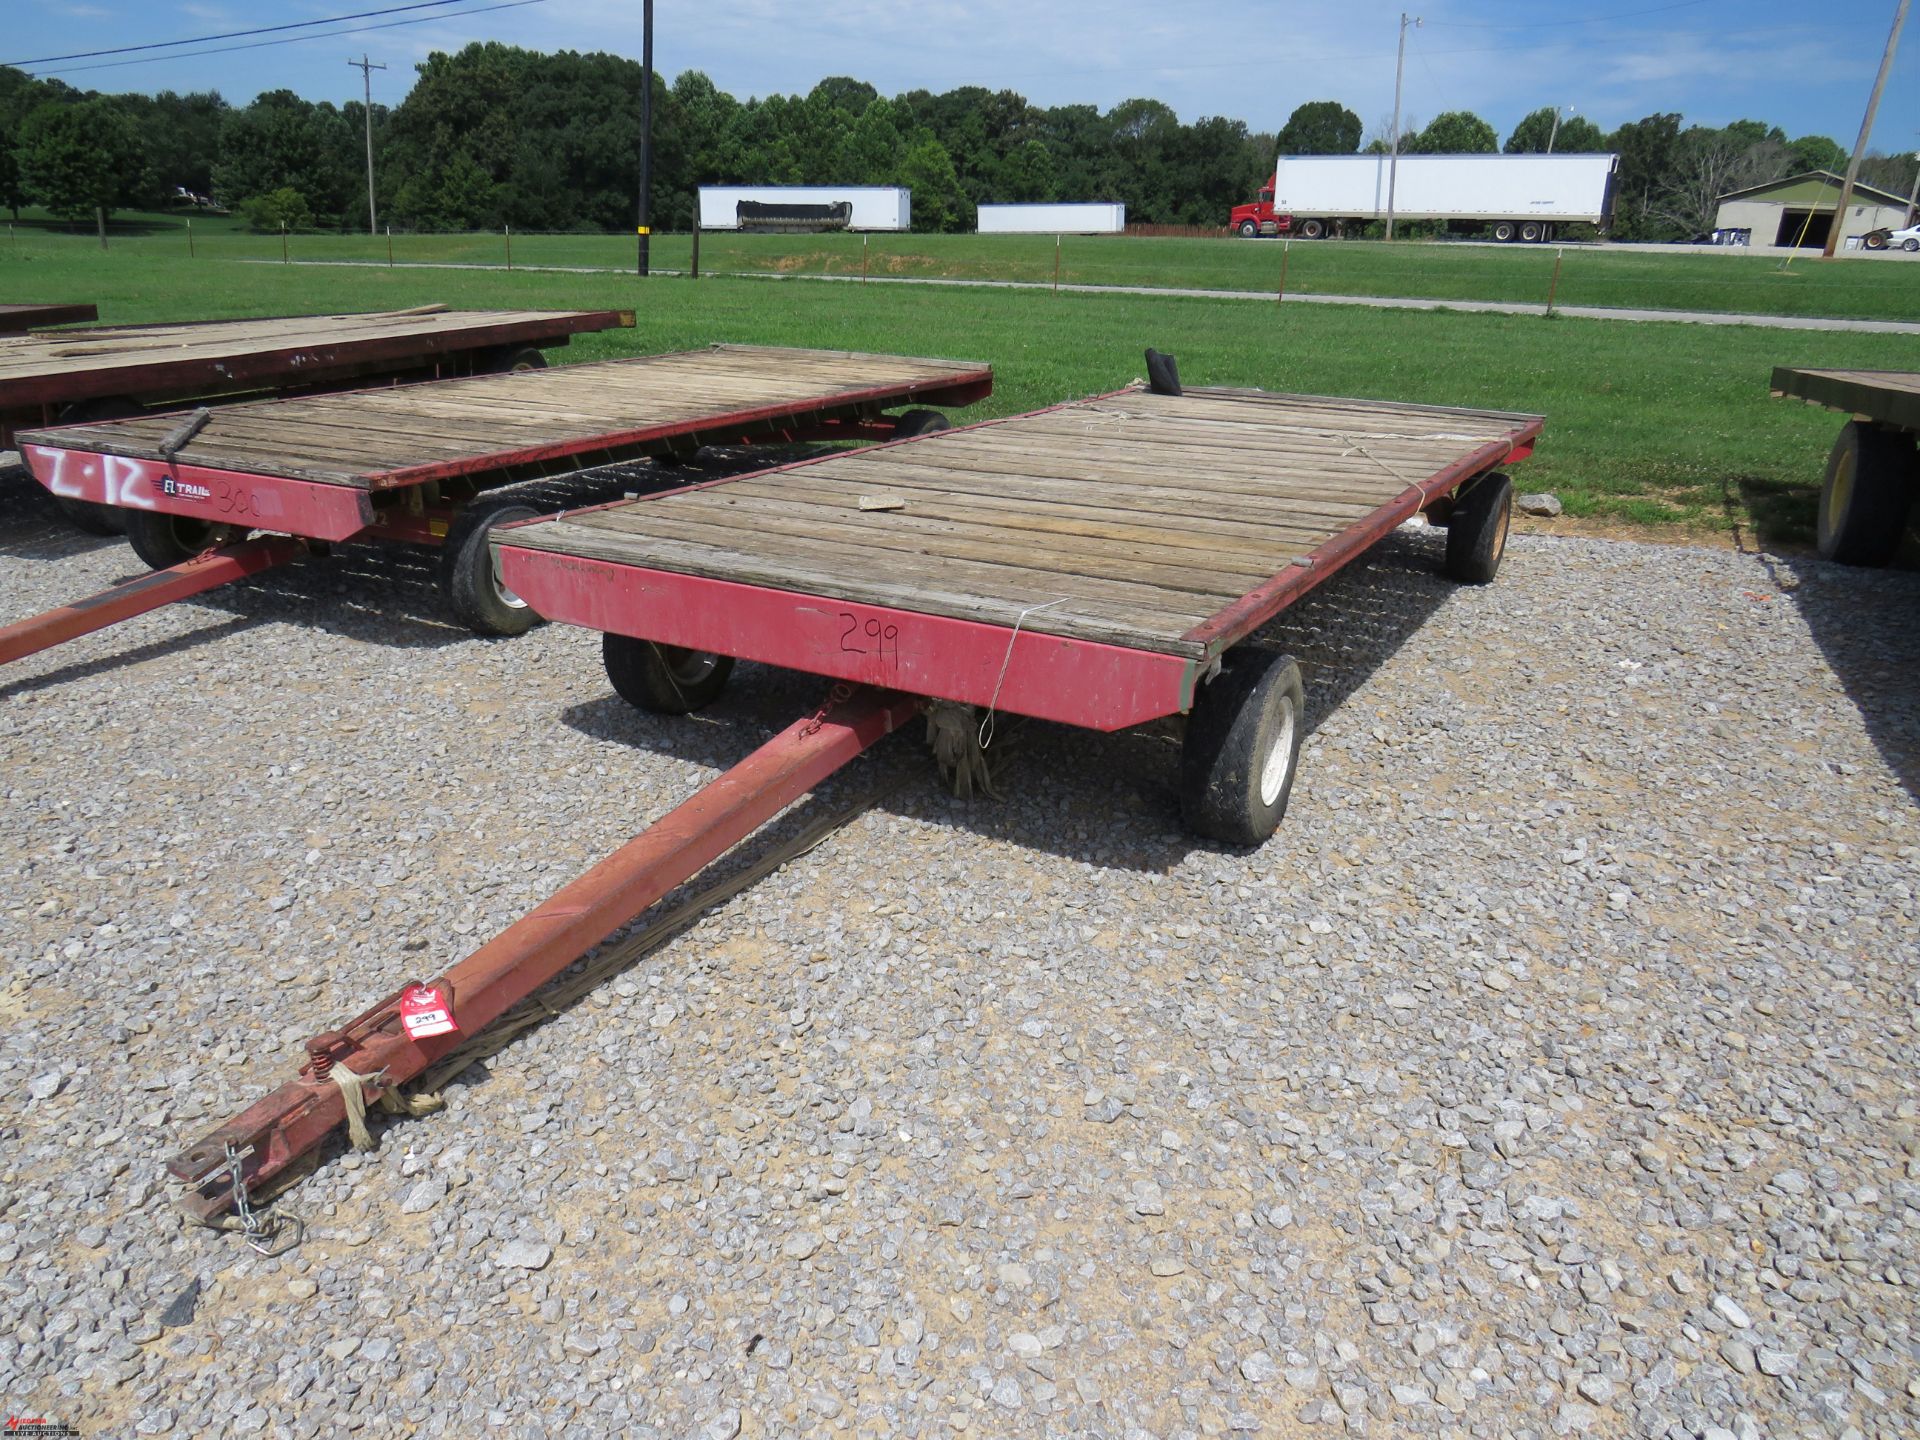 EZ TRAIL FLAT BED TRAILER, 15', SMALL TIRES, PIN HITCH